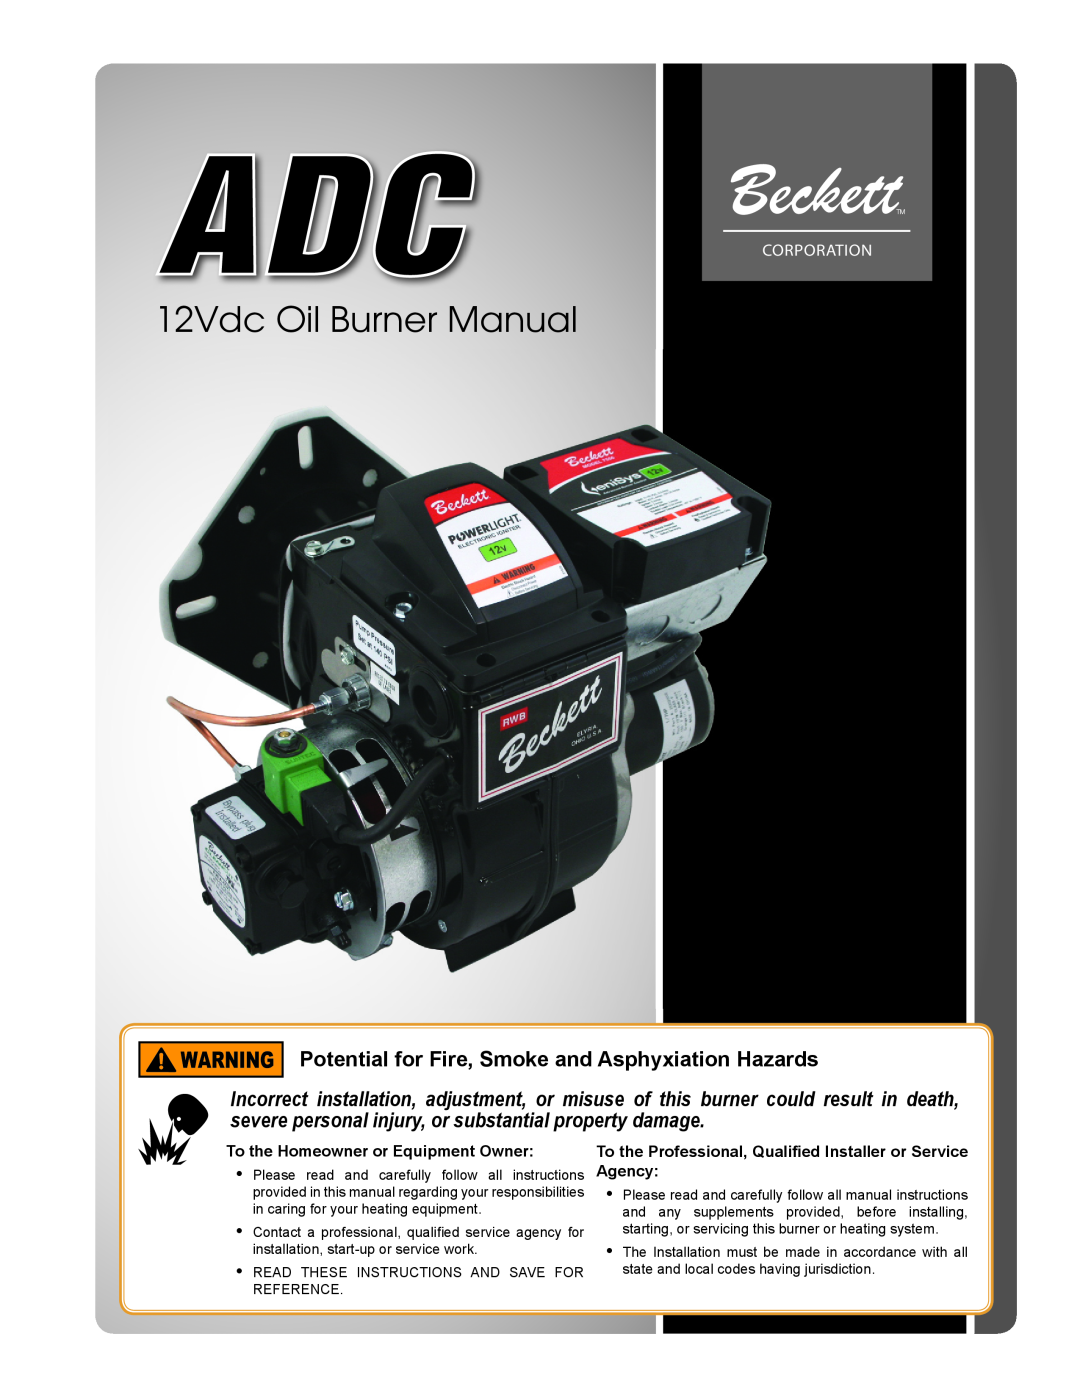 Beckett ADC manual Potential for Fire, Smoke and Asphyxiation Hazards, 12Vdc Oil Burner Manual, Corporation 